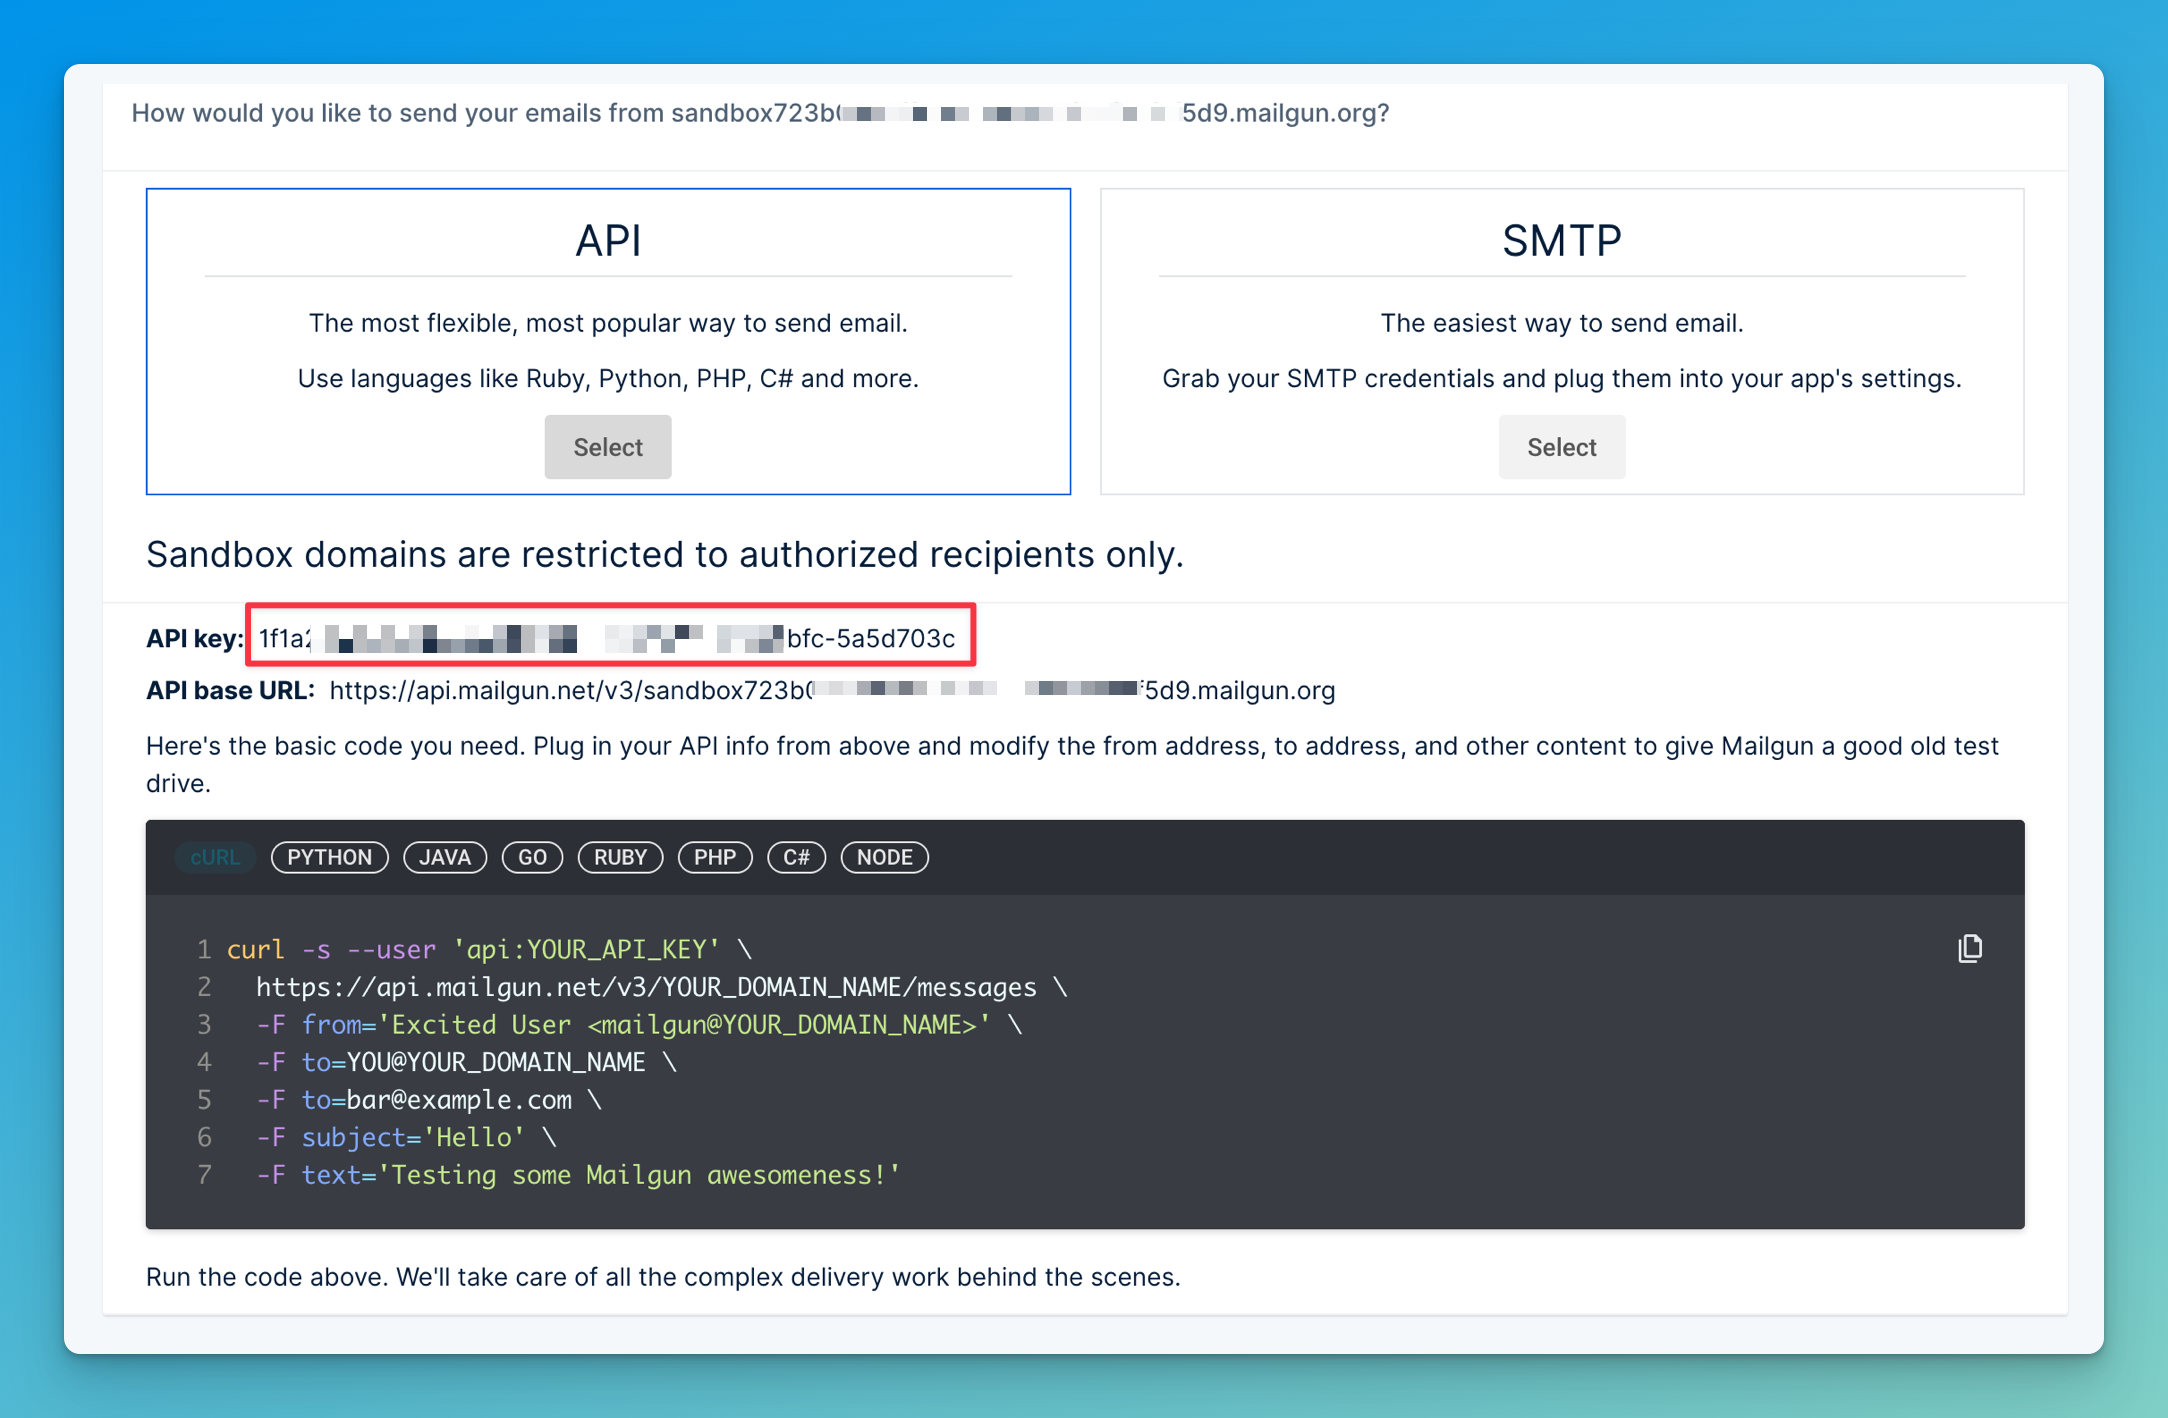 Click the &#39;Select&#39; button to reveal your Mailgun API key